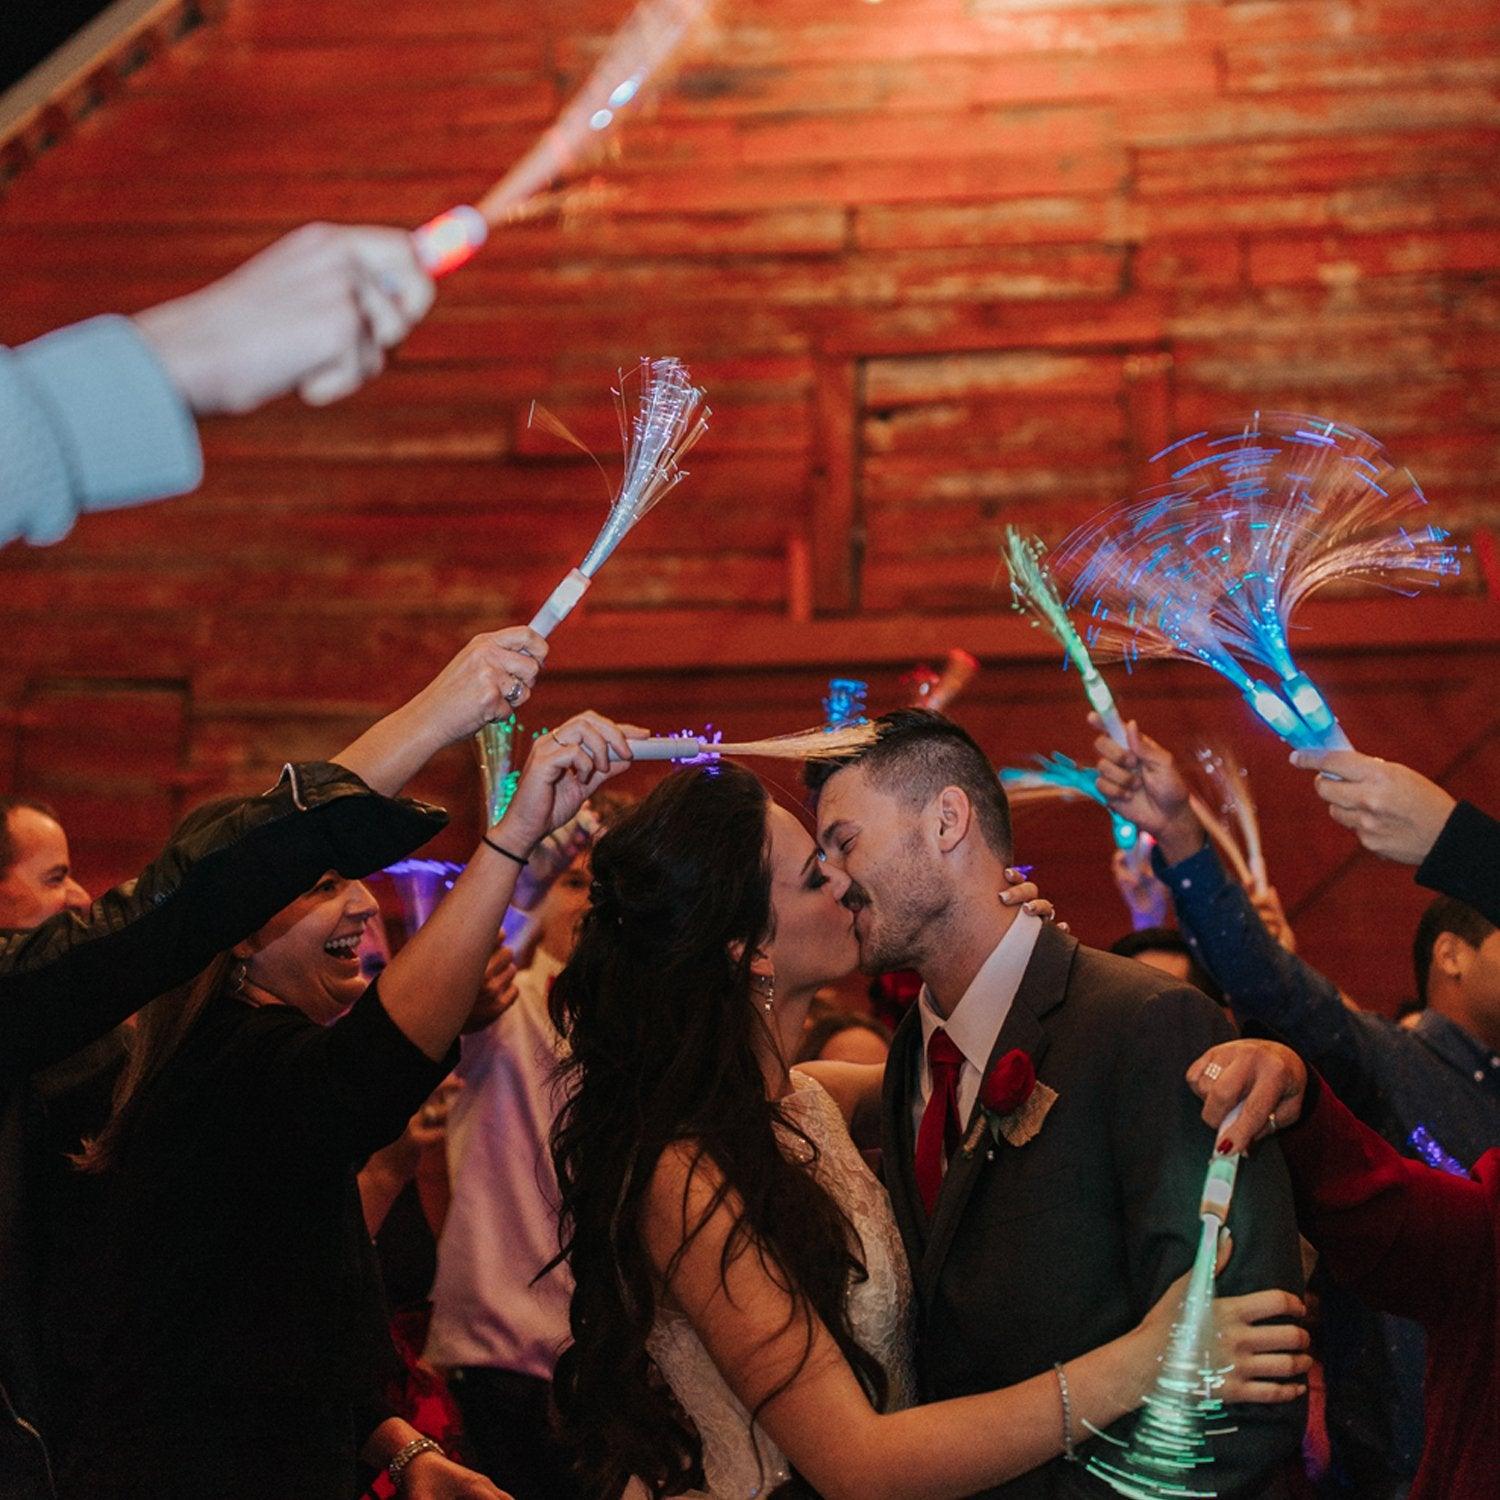 Led Fiber Optic Wands For Wedding, Night Time Wedding Send Off Ideas a – If  you say i do